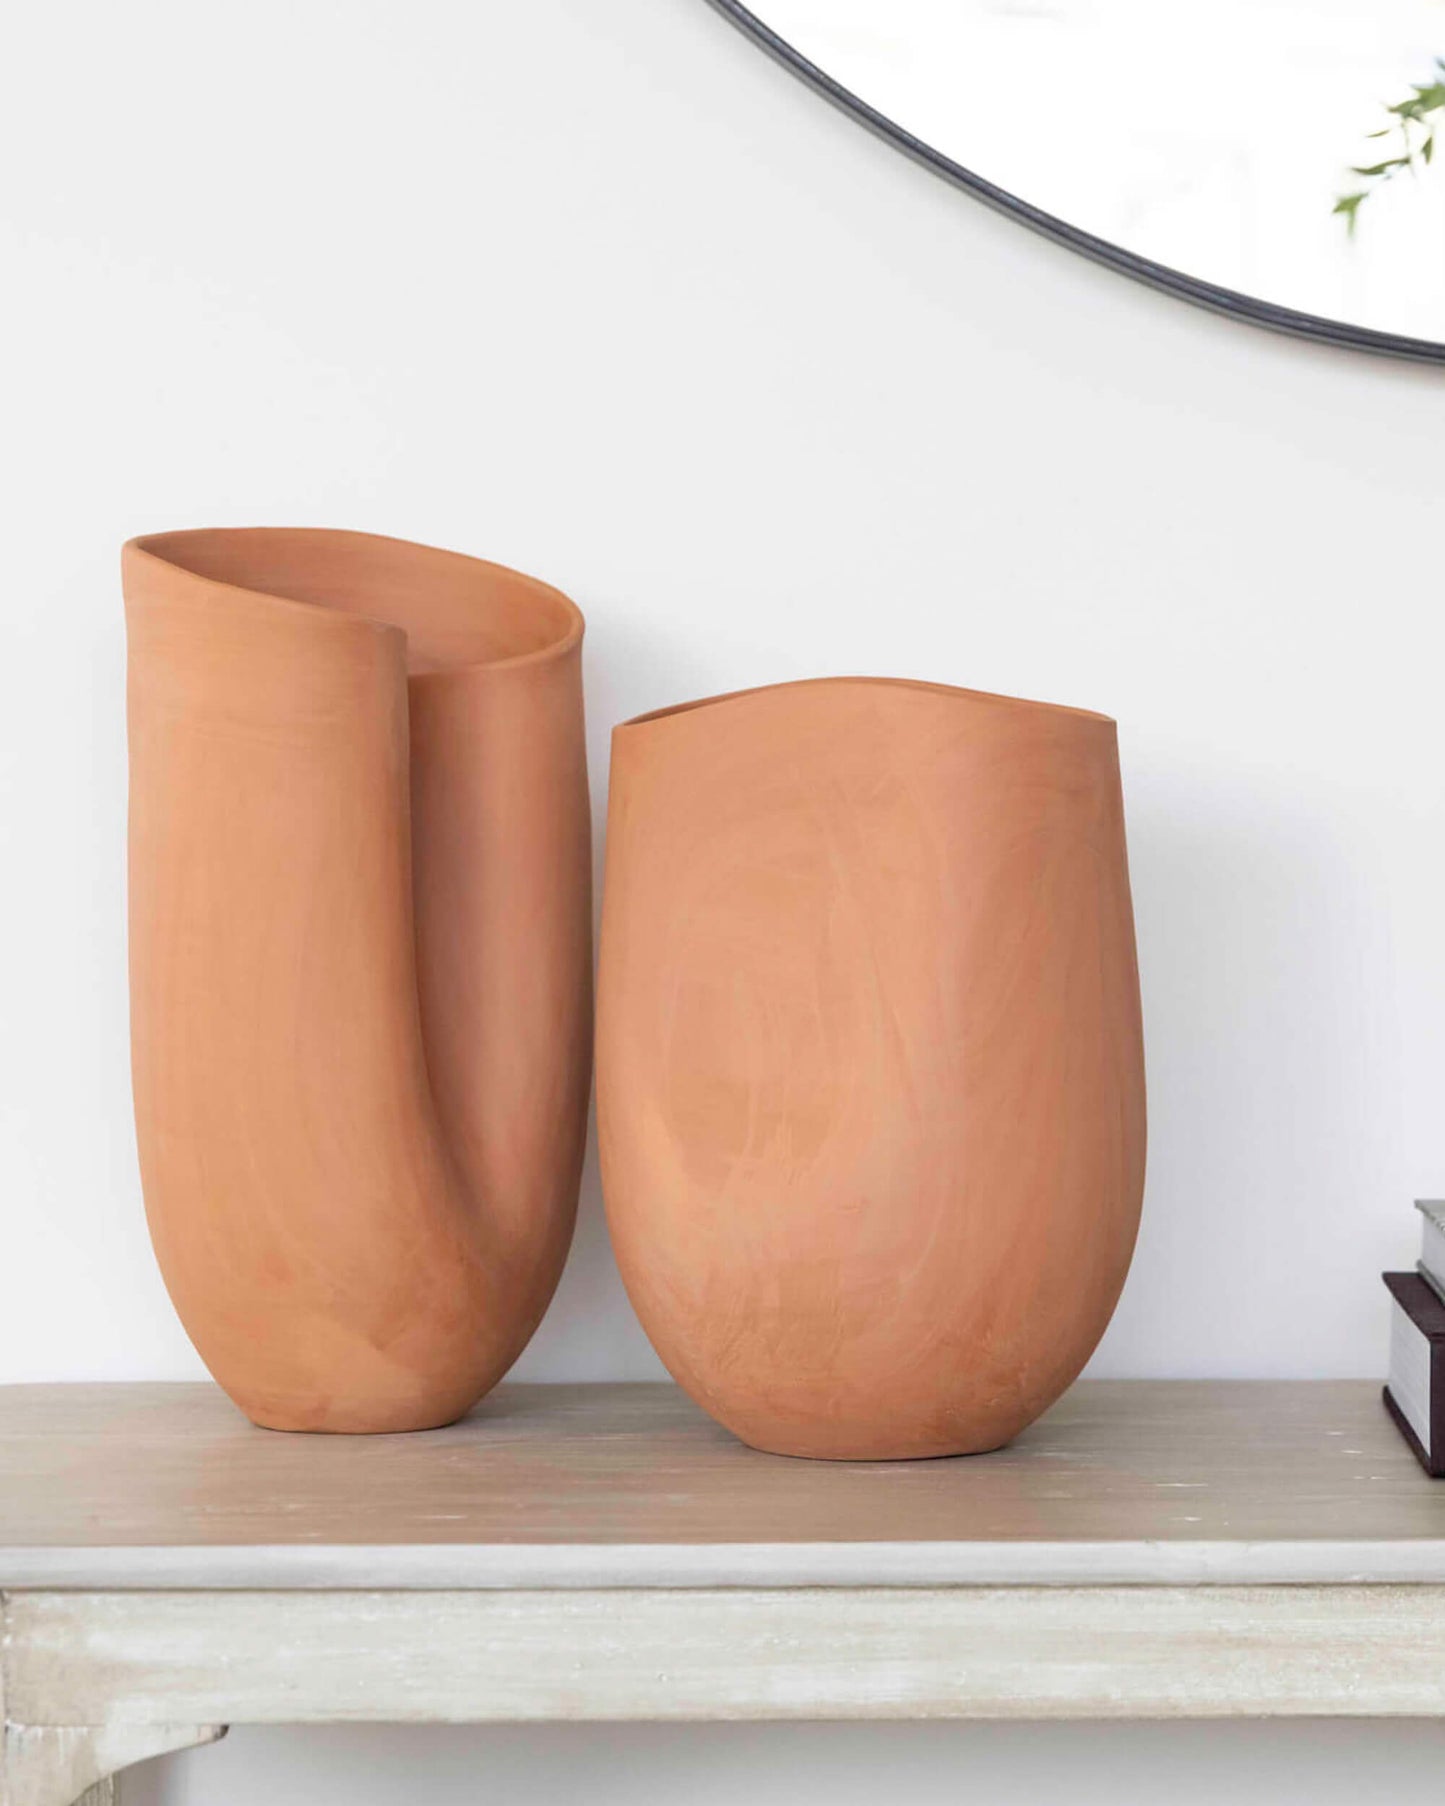 
                  
                    Handcrafted terracotta vases made in modern, sculptural style. Styled as decor on sideboard.
                  
                